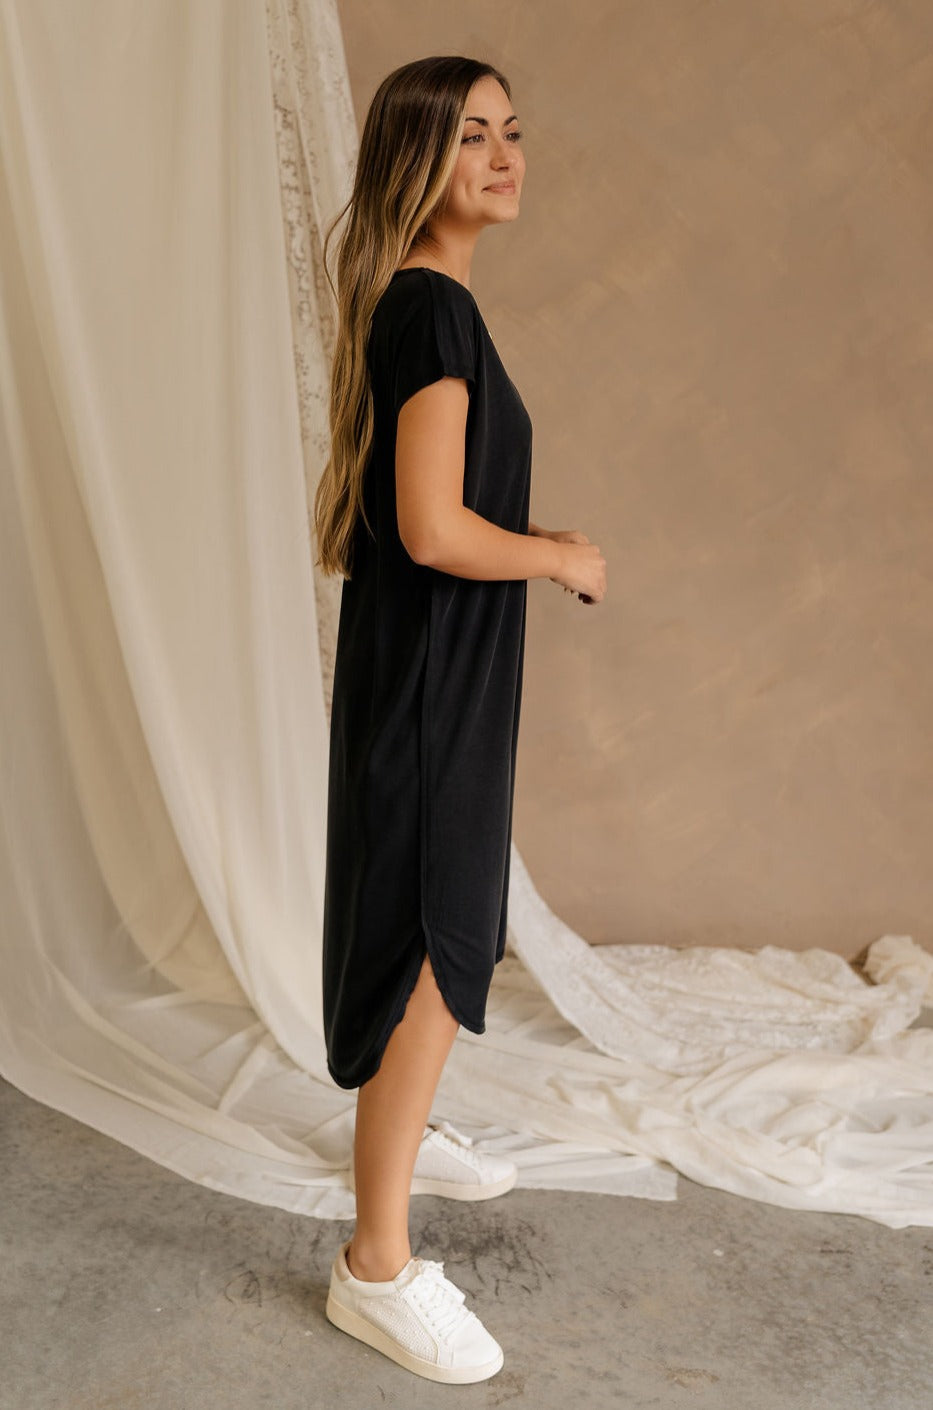 Full body side view of female model wearing the Remy Black Short Sleeve Midi Dress that features black knit fabric, short sleeves, midi length, and side slits.